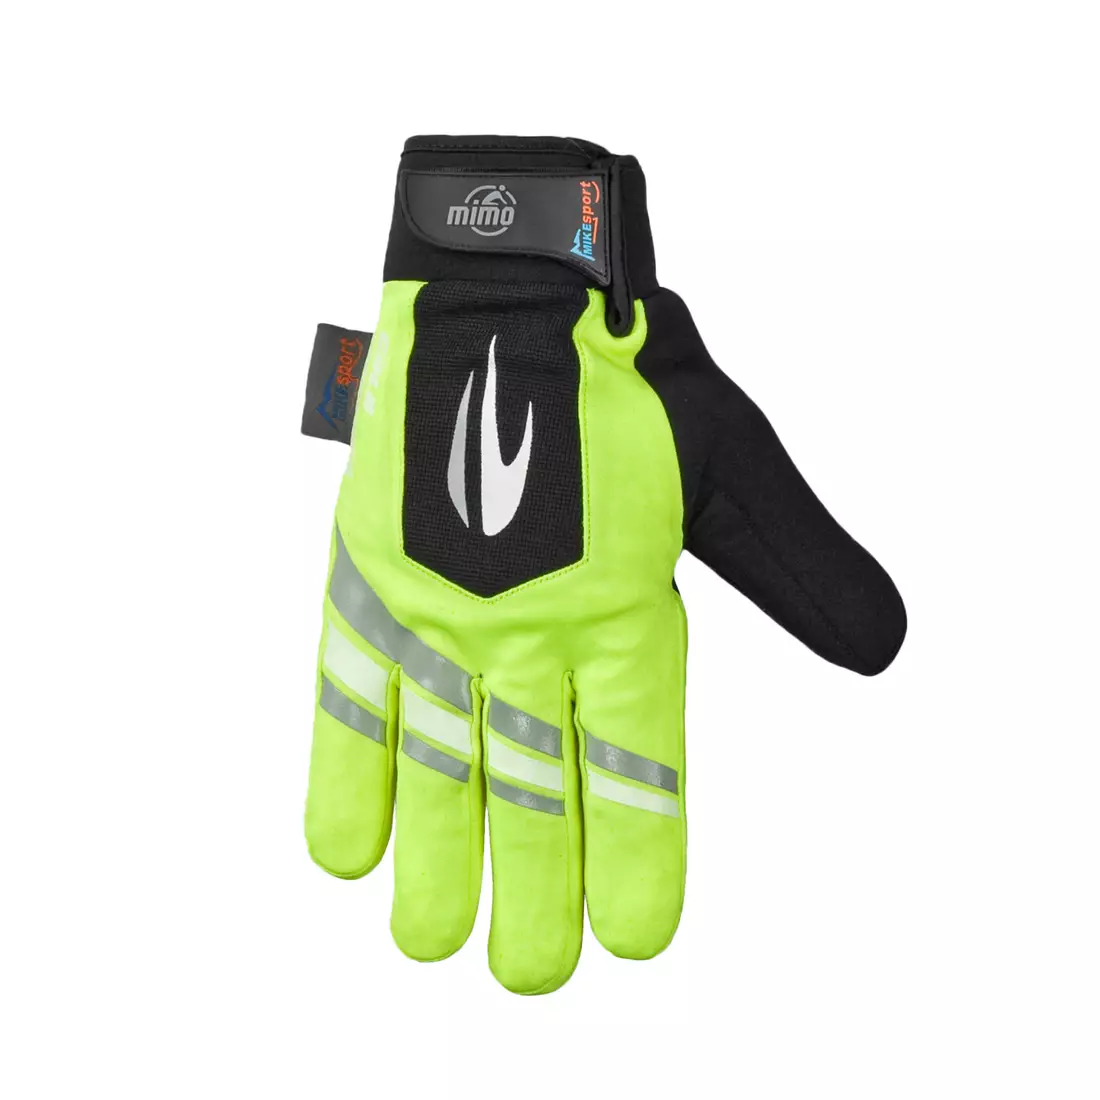 MikeSPORT 2014-W 1902 winter cycling gloves, color: fluorine